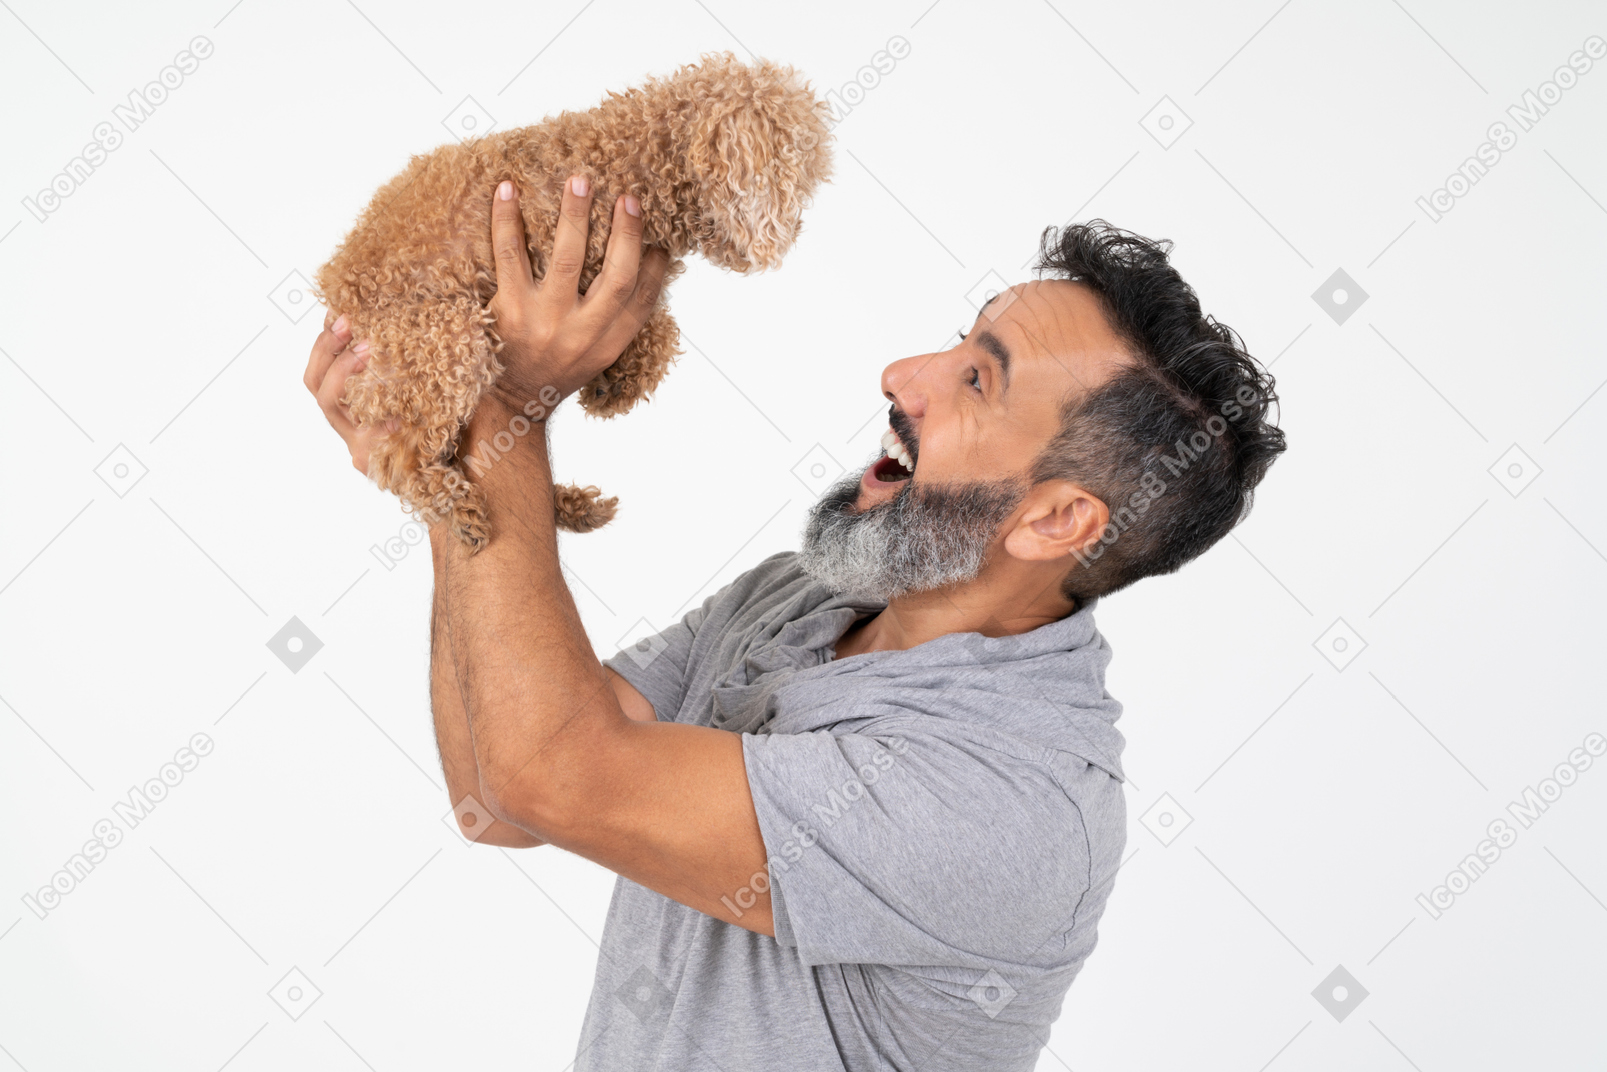 Man playing with a dog